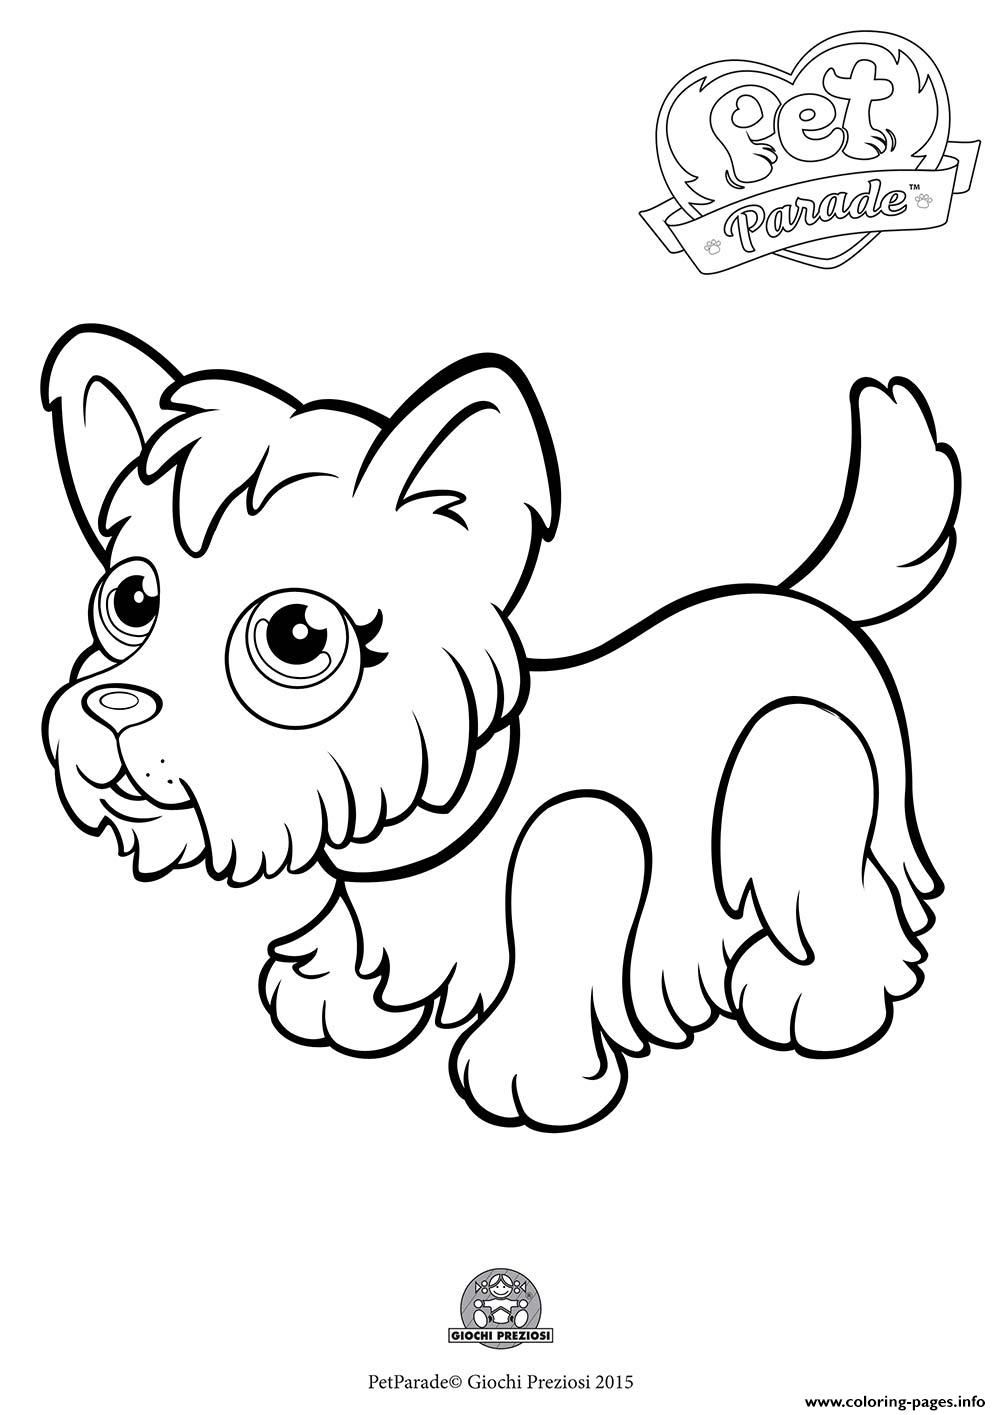 Print pet parade cute dog yorkshire Coloring pages Free Printable